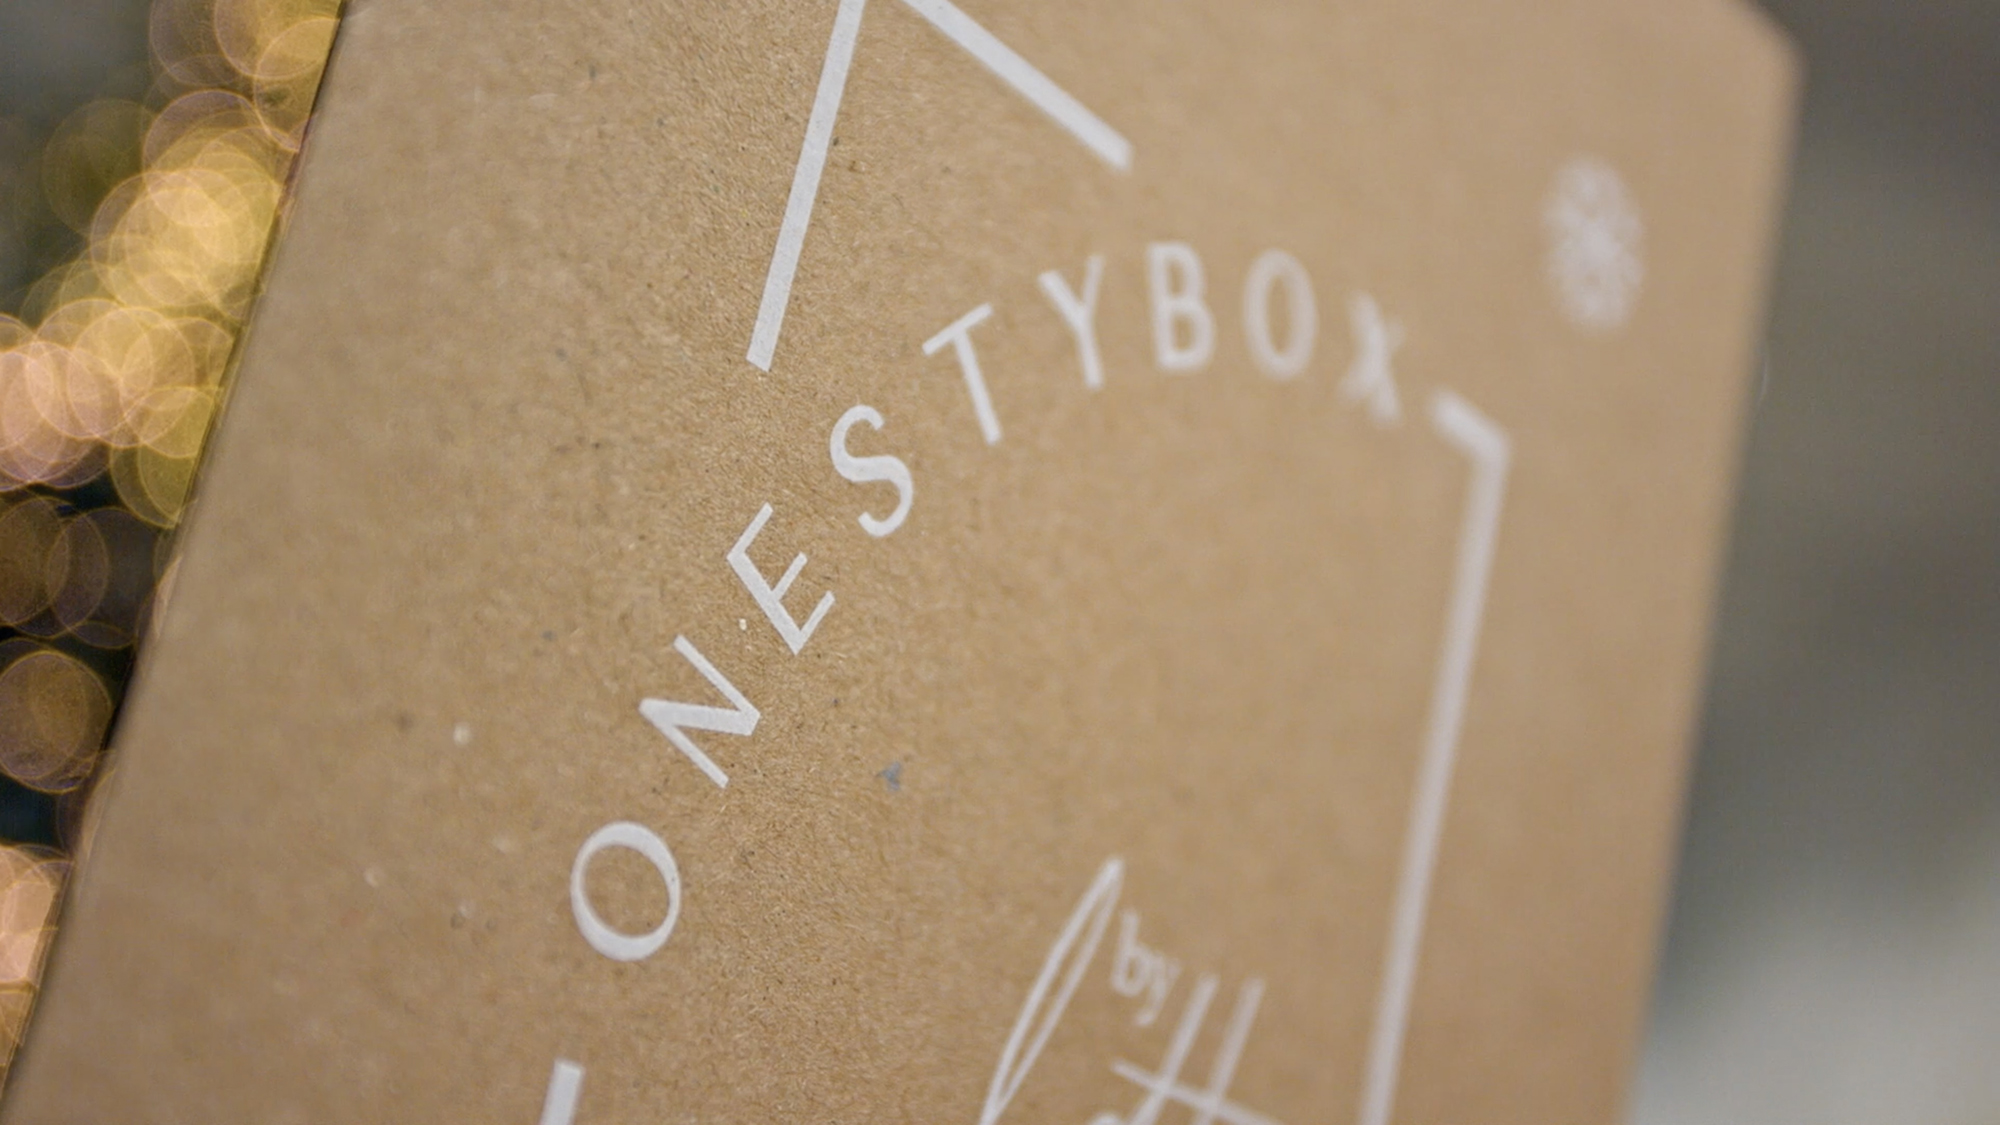 A close up photograph of the onestybox logo, printed in white toner on a brown, environmentally friendly Kraft paper booklet